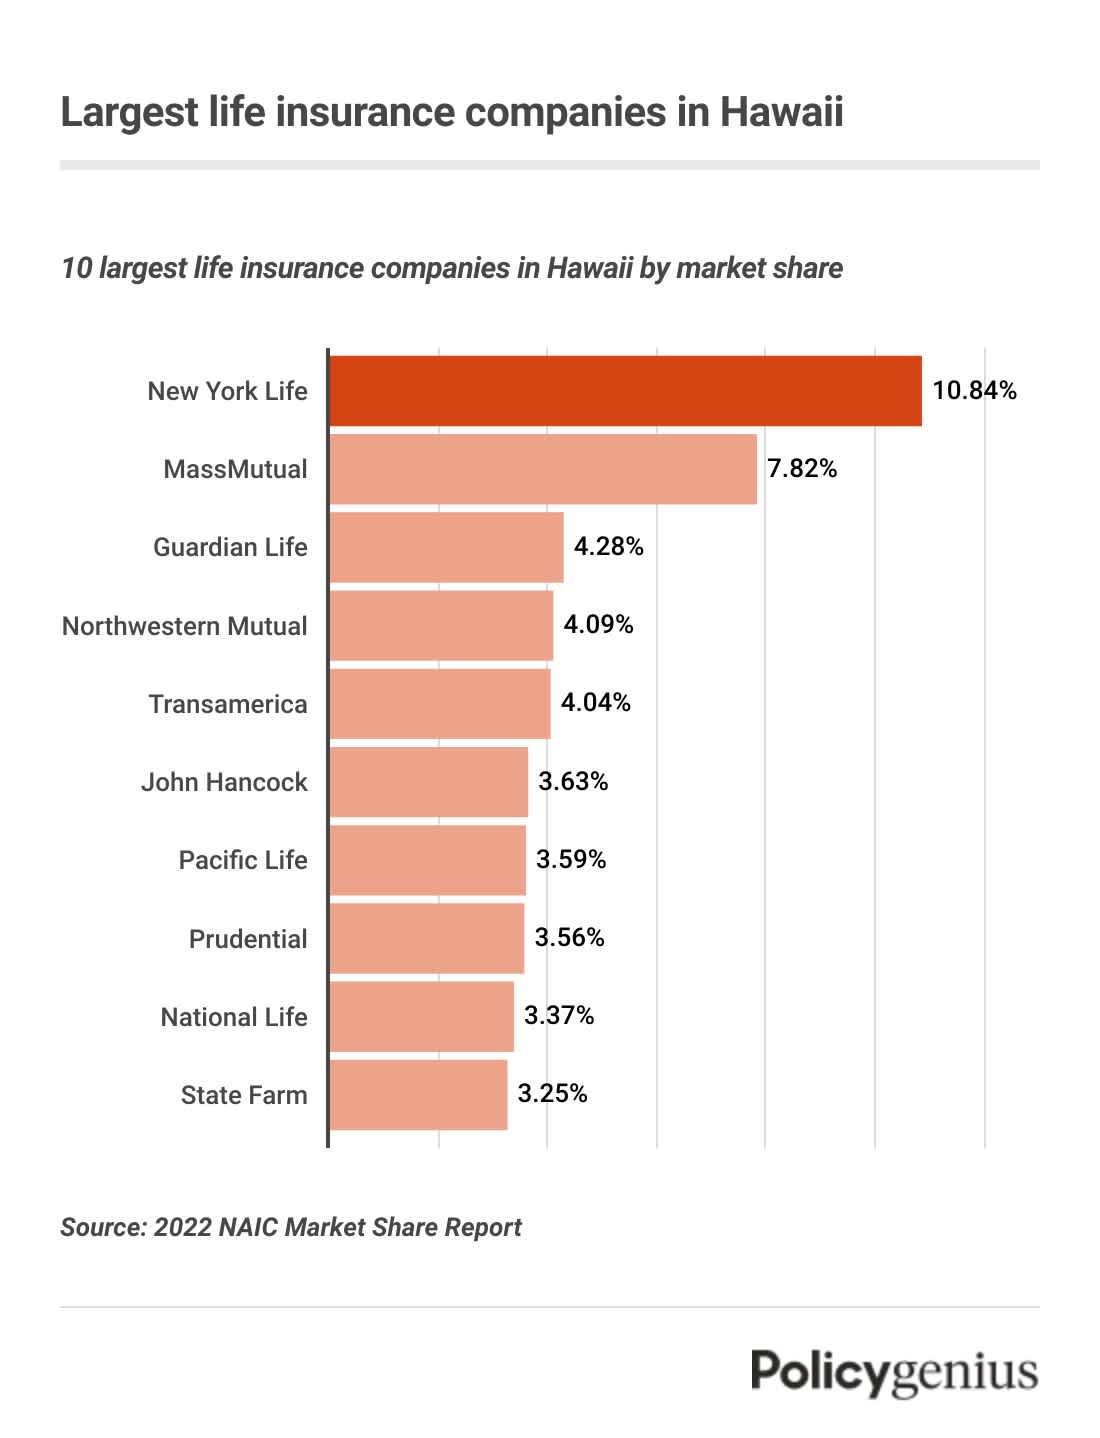 A bar graph showing the largest life insurance companies in Hawaii. New York Life is the largest by market share.